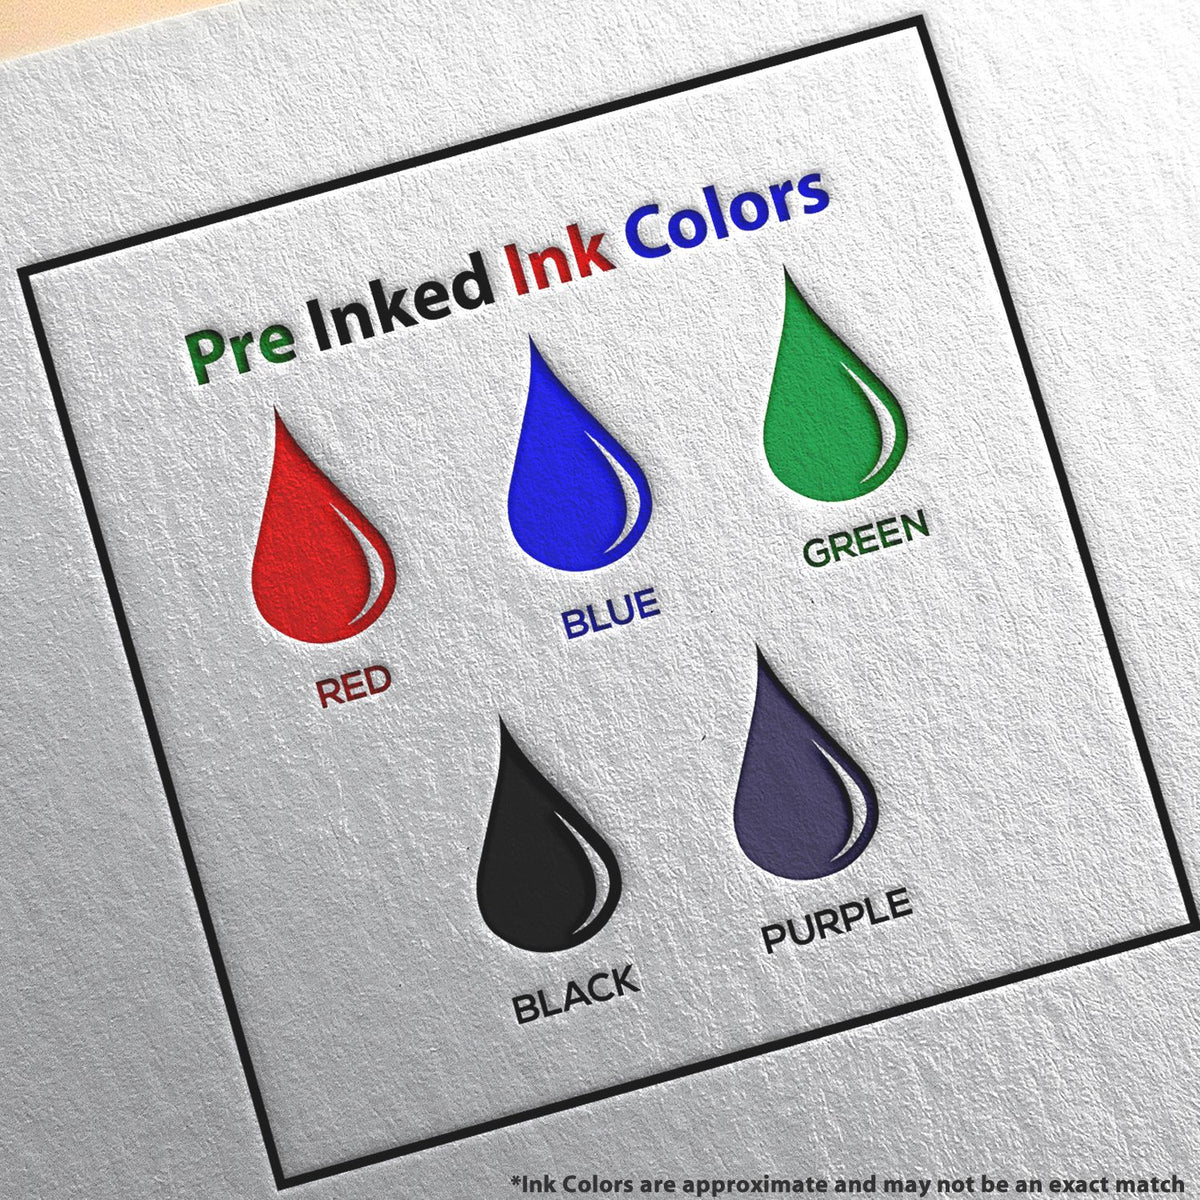 A picture showing the different ink colors or hues available for the Slim Pre-Inked South Dakota Professional Geologist Seal Stamp